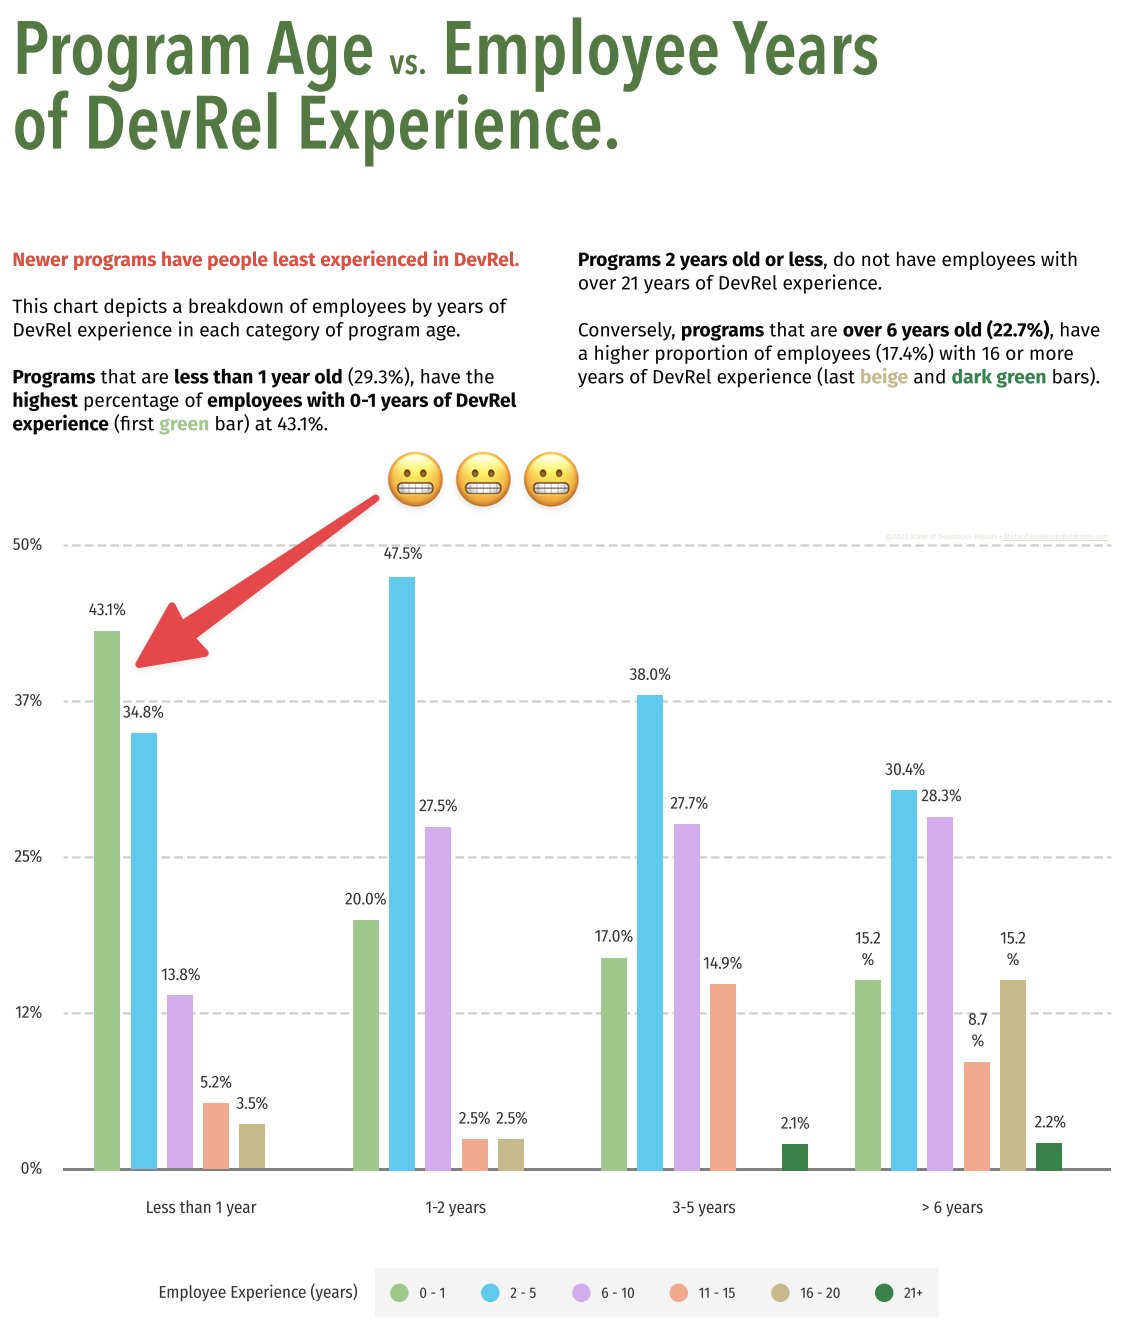 Program Age vs. Employee Years of DevRel Experience. Image credit: [Taylor Barnett](https://twitter.com/taylor_atx) and [2022 State of Developer Relations report](https://www.stateofdeveloperrelations.com/)